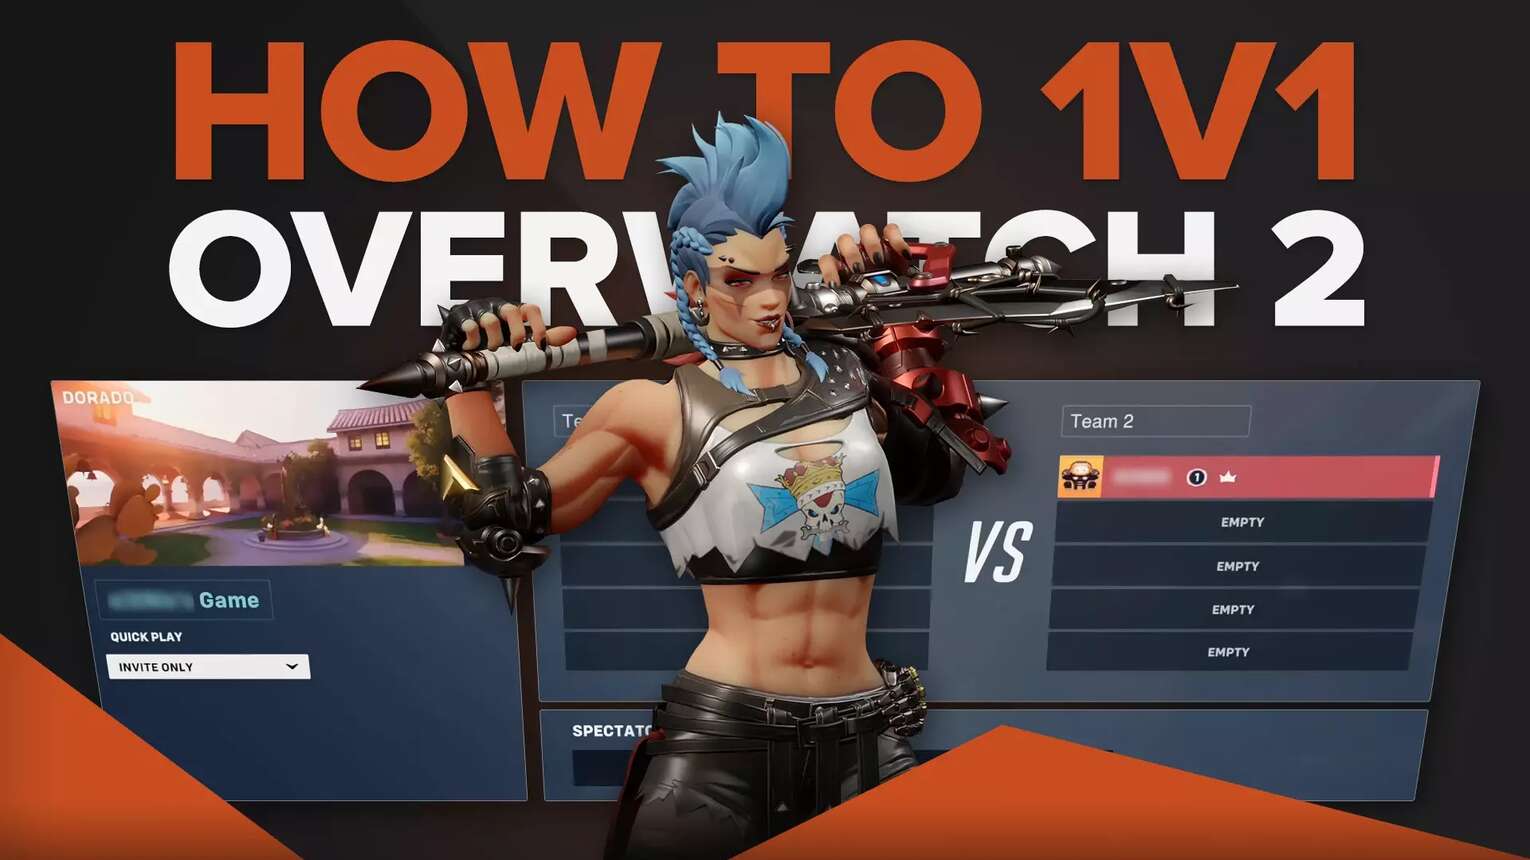 How To 1v1 in Overwatch [Step-by-Step Guide]